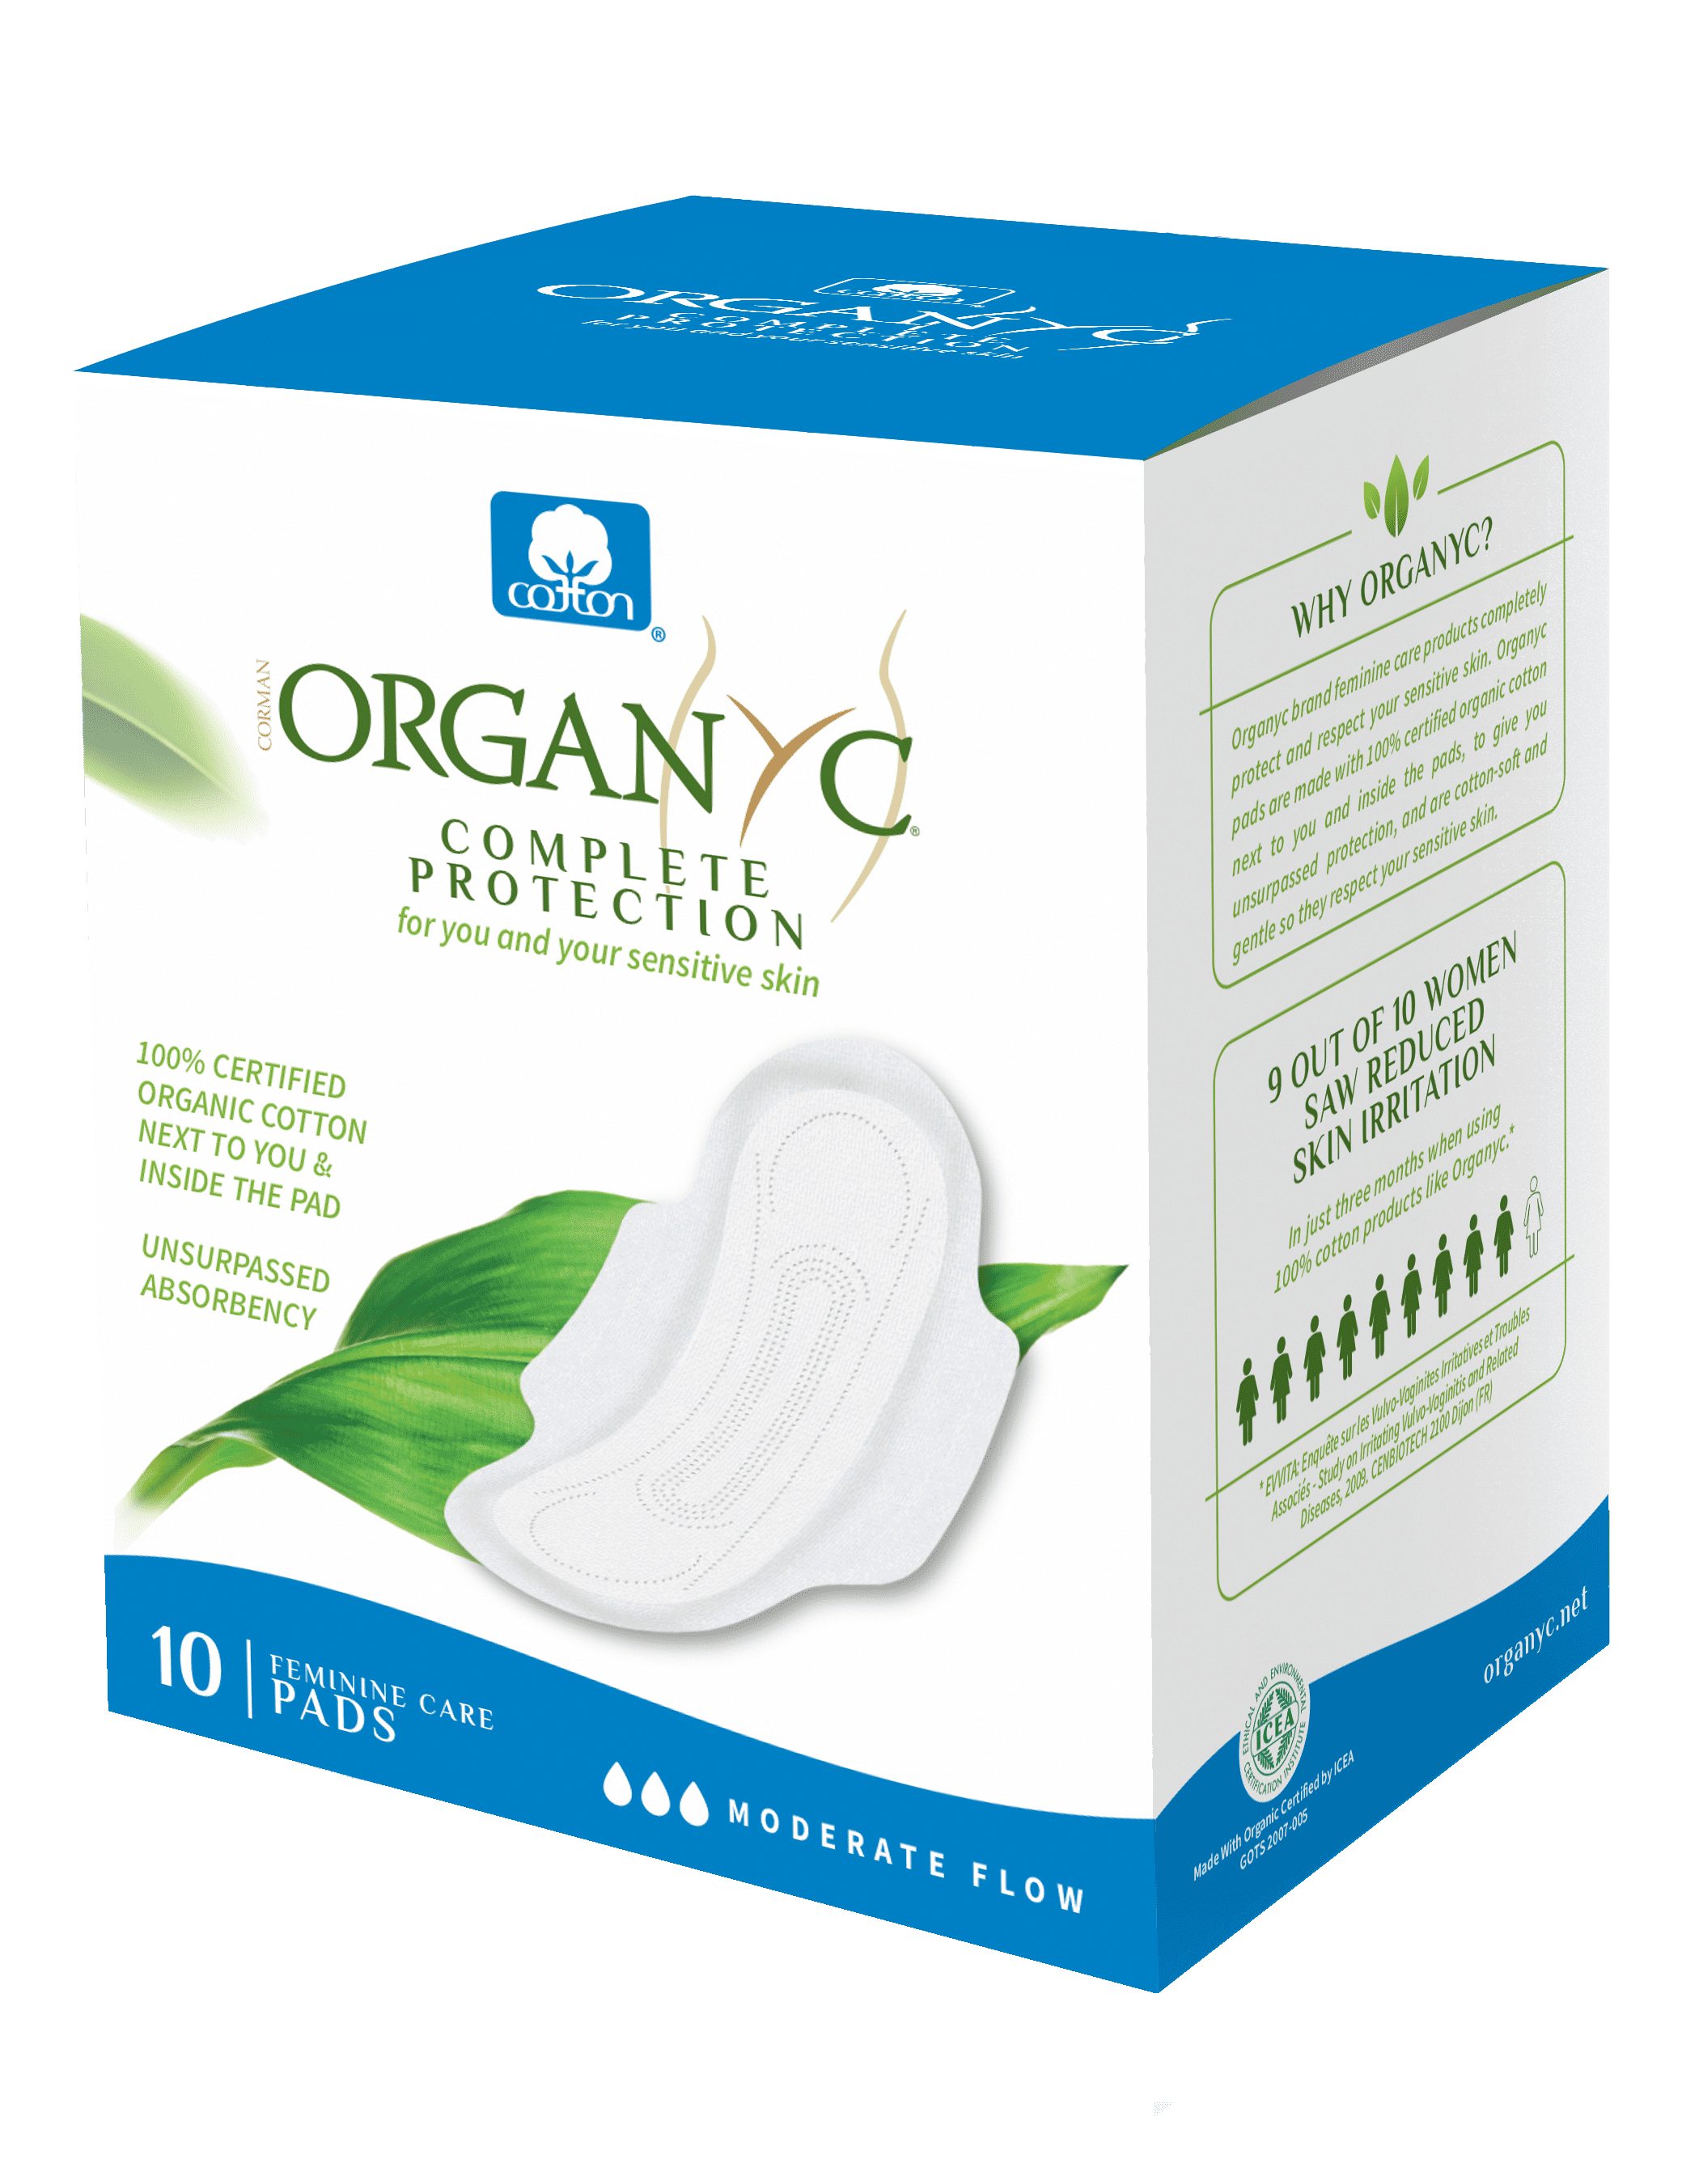 Breast pads made of 100 percent organic cotton - GU Planet